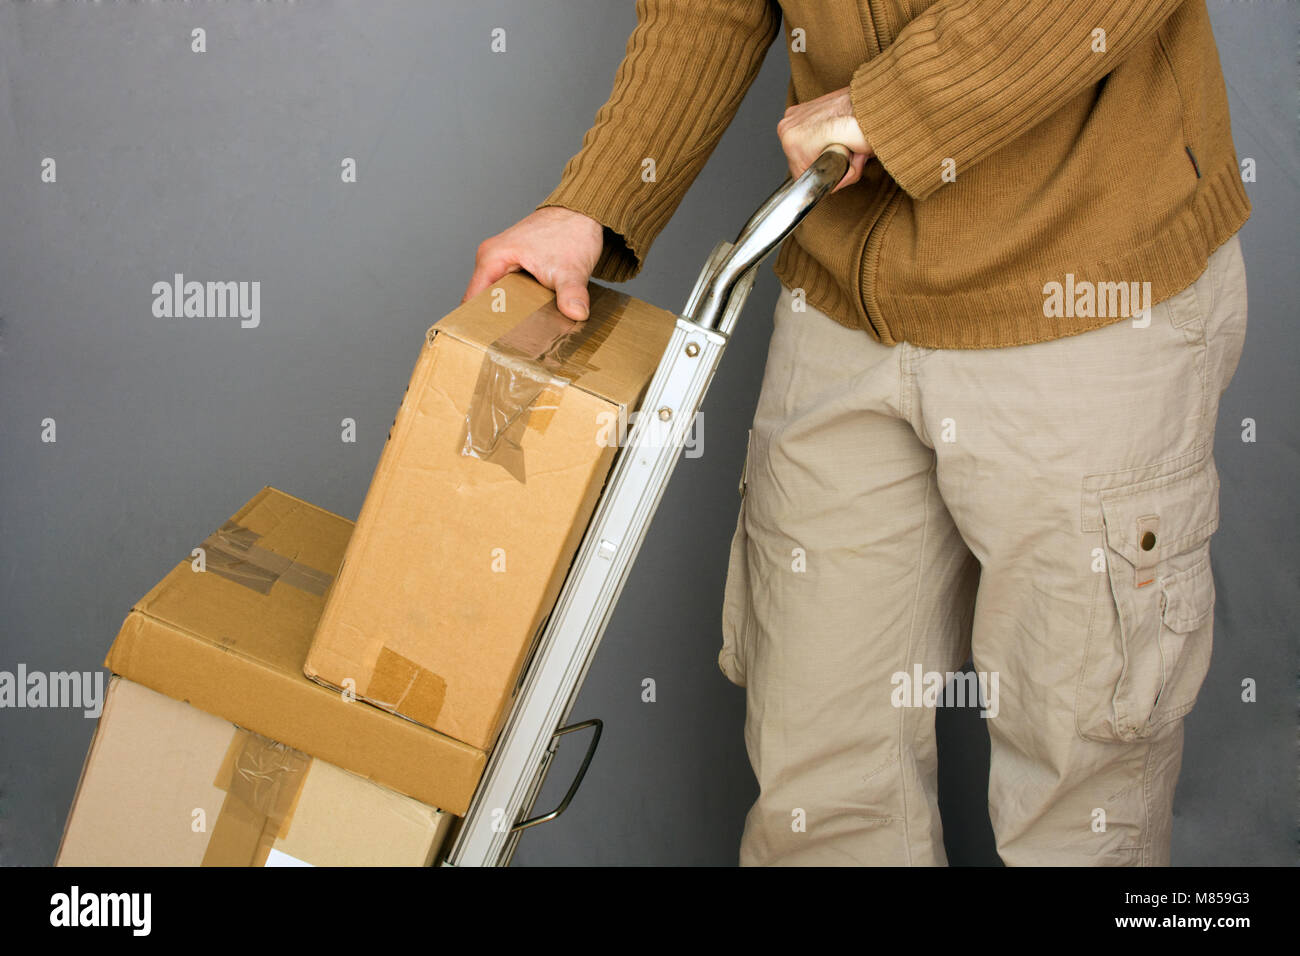 men transporting brown packages on handtruck for shipping Stock Photo